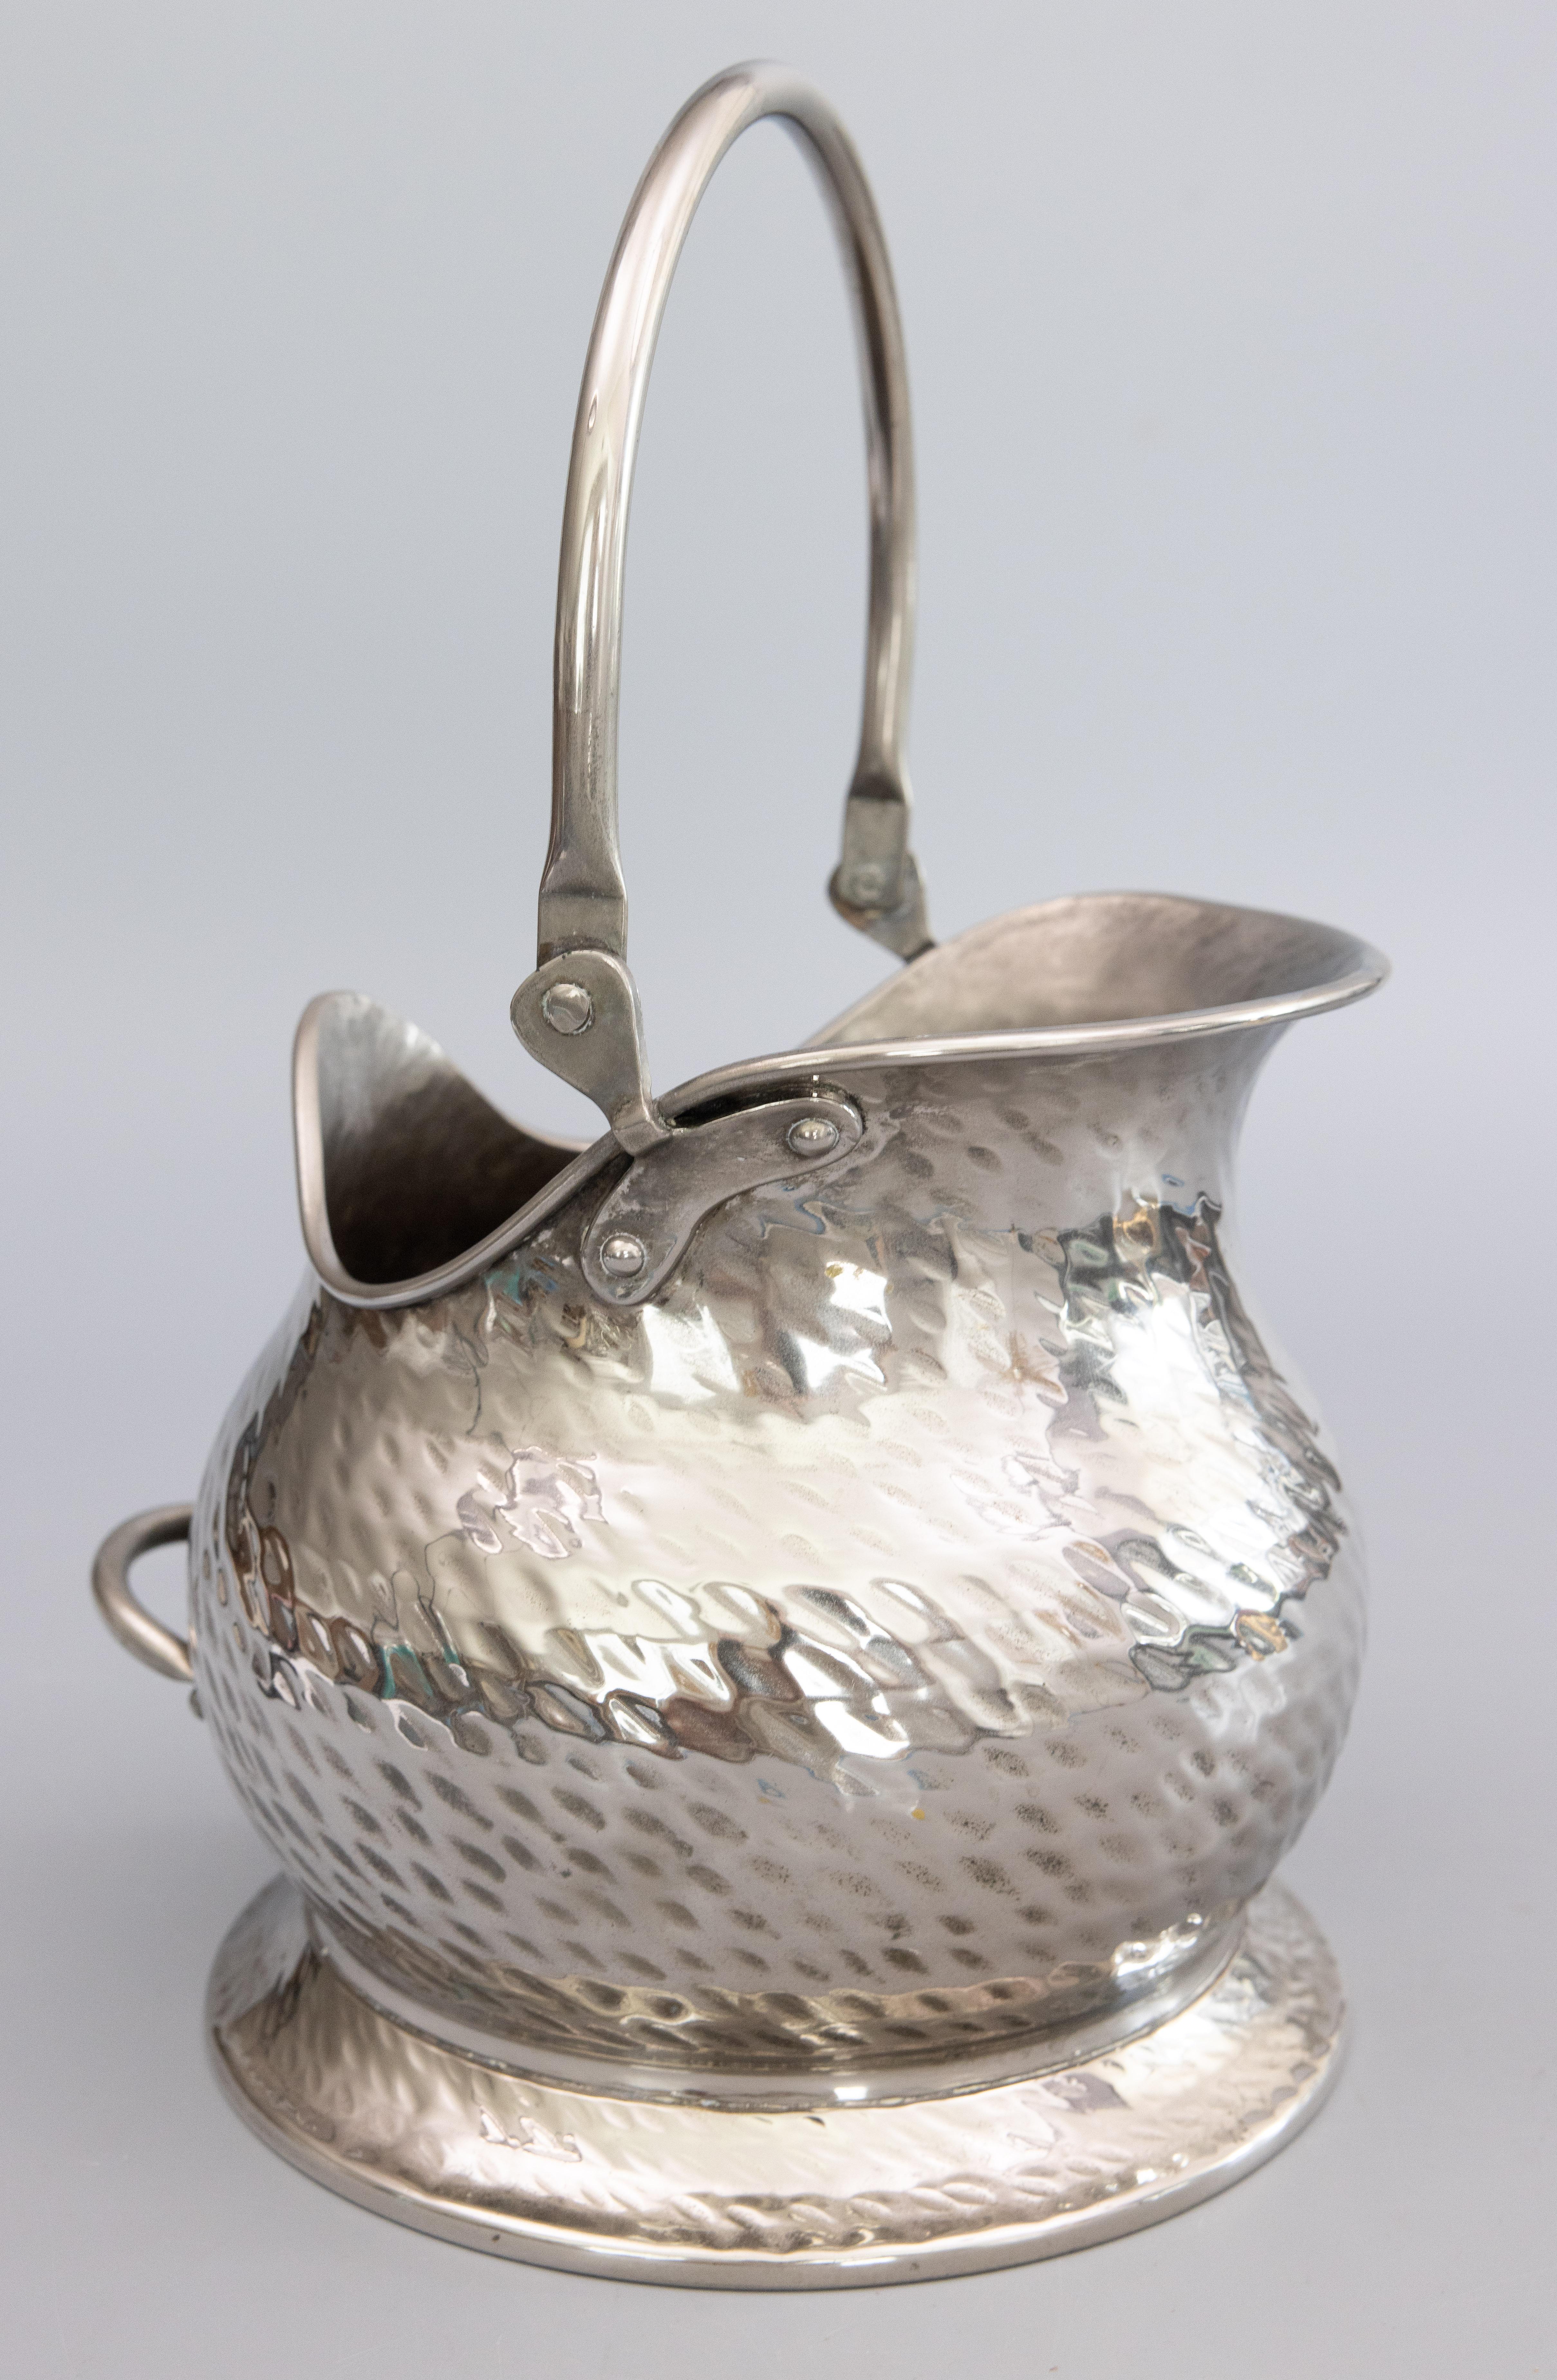 Italian Hammered Silver Plate Helmet Coal Scuttle Jardiniere Planter Wine Cooler In Good Condition For Sale In Pearland, TX